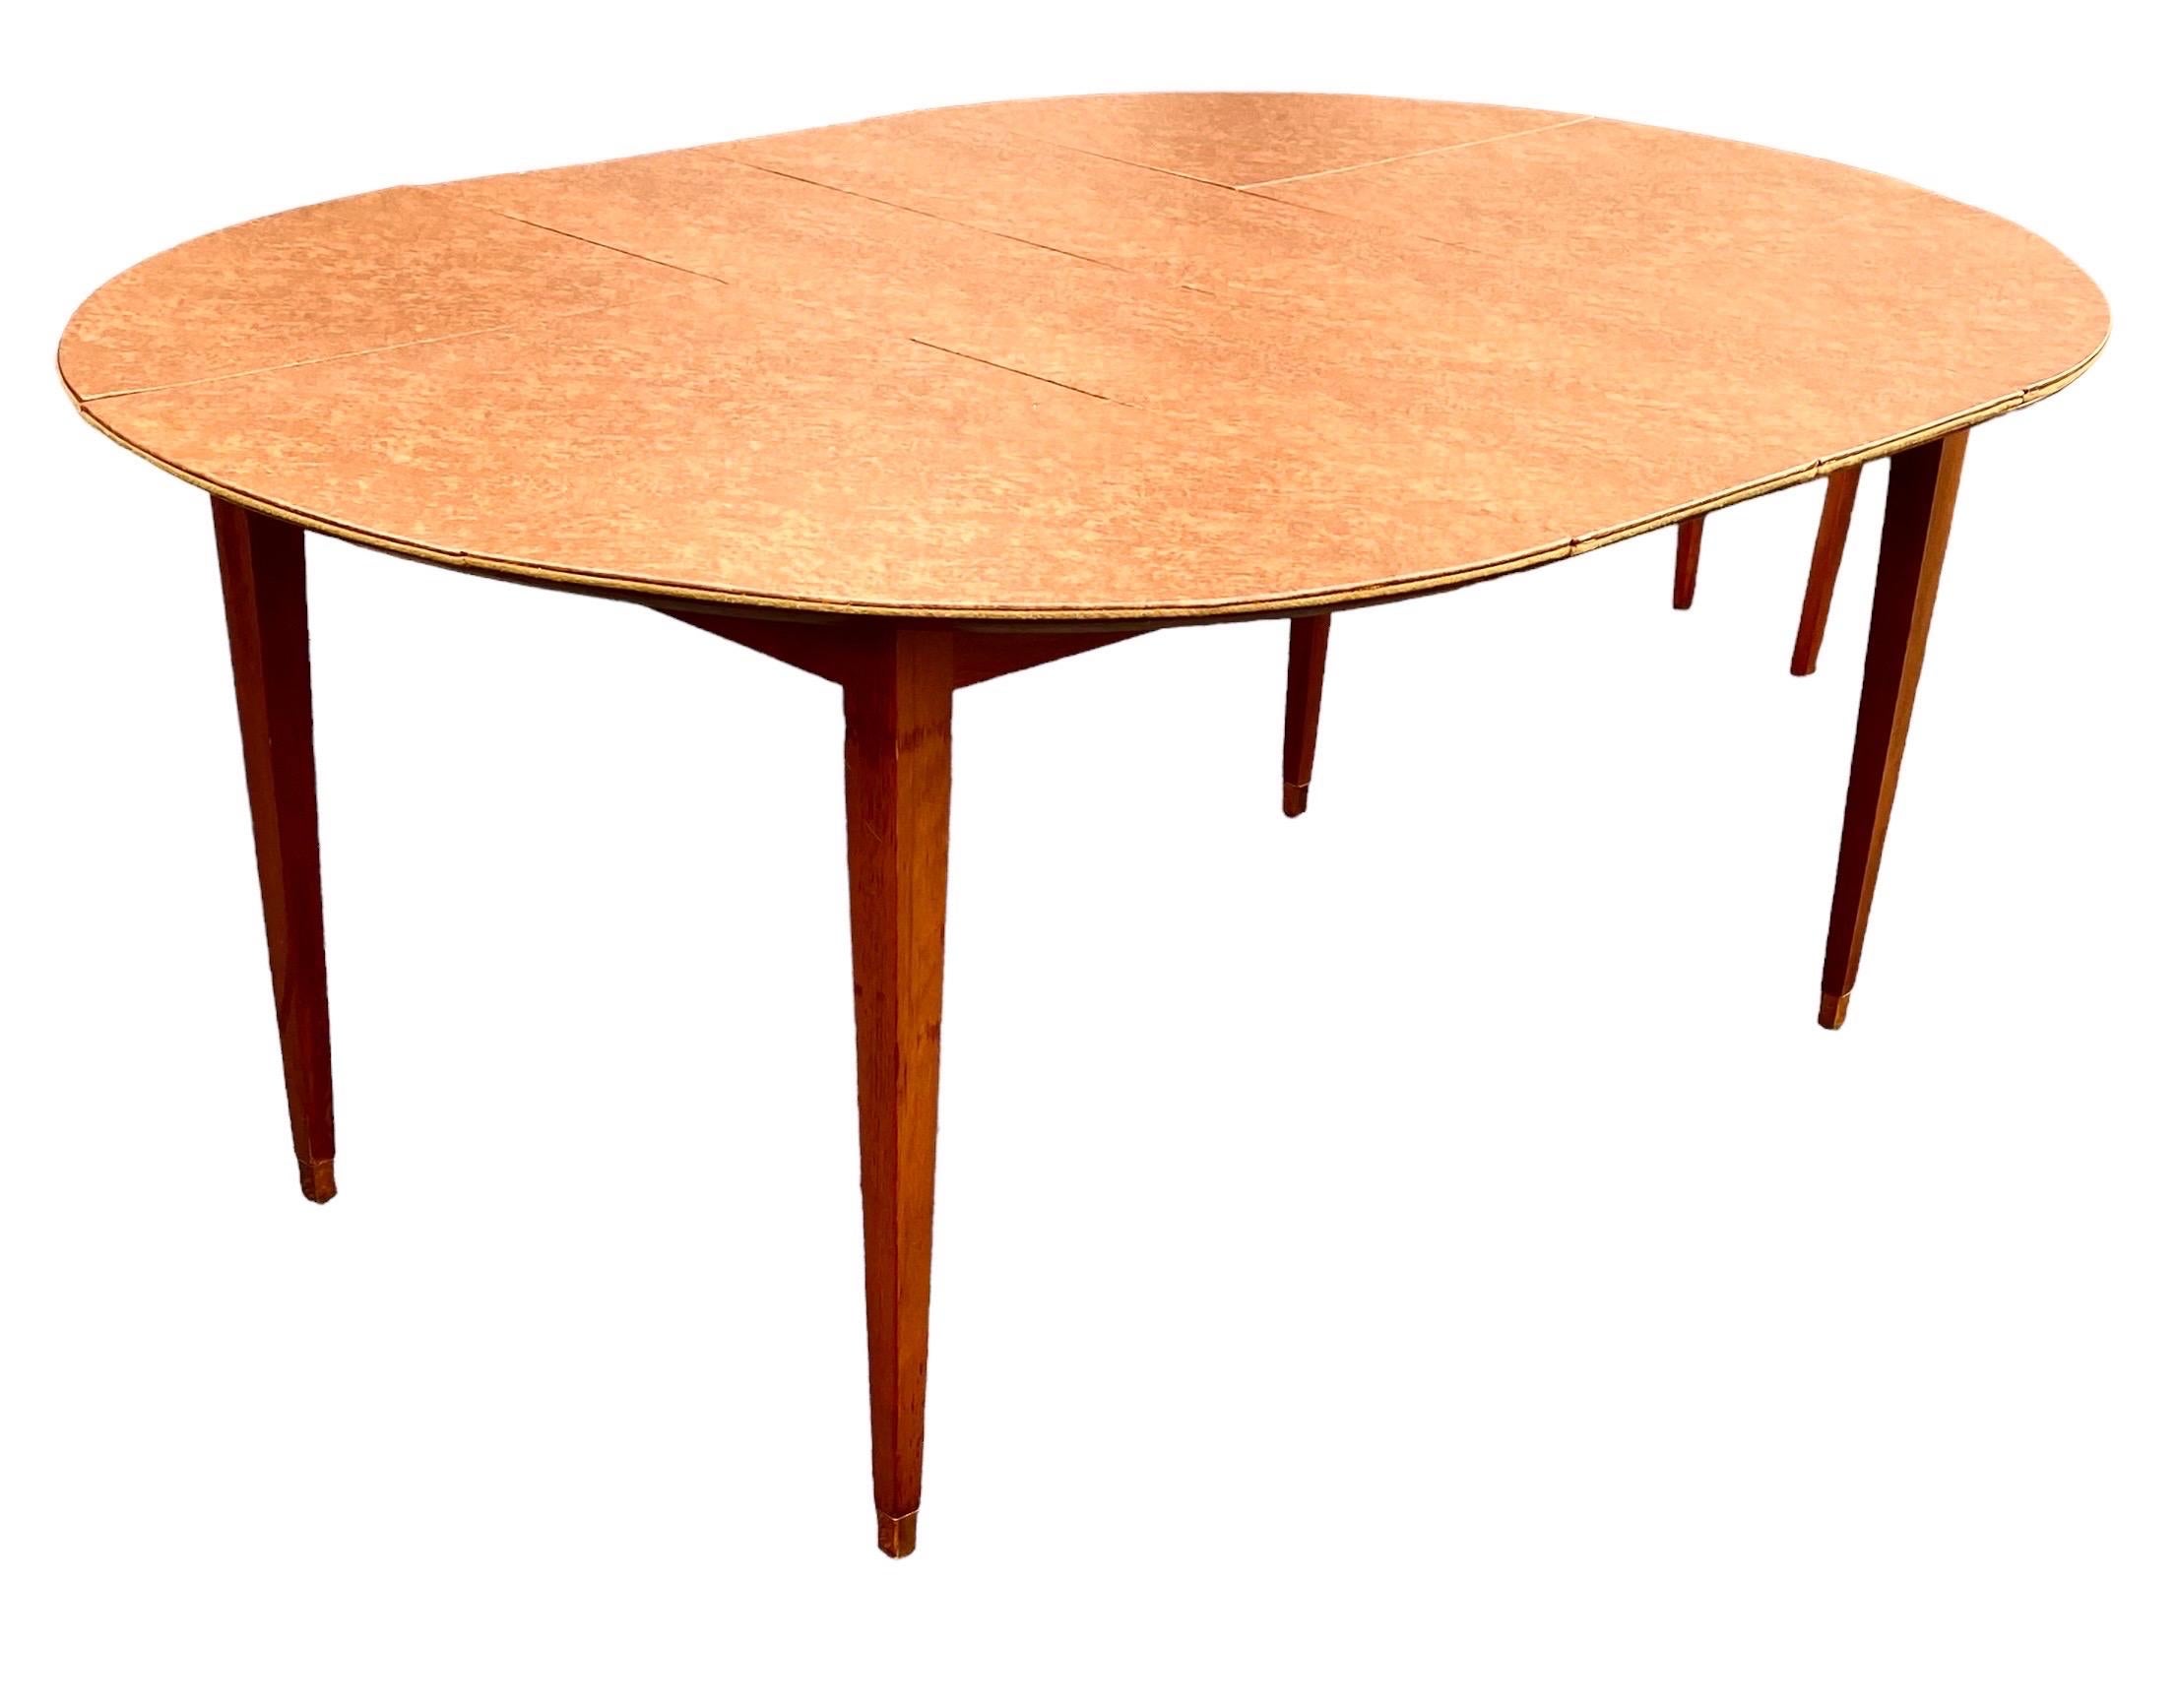 Late 20th Century Mid-Century Modern Teak Dining Table, Two Leaves And Four Chairs